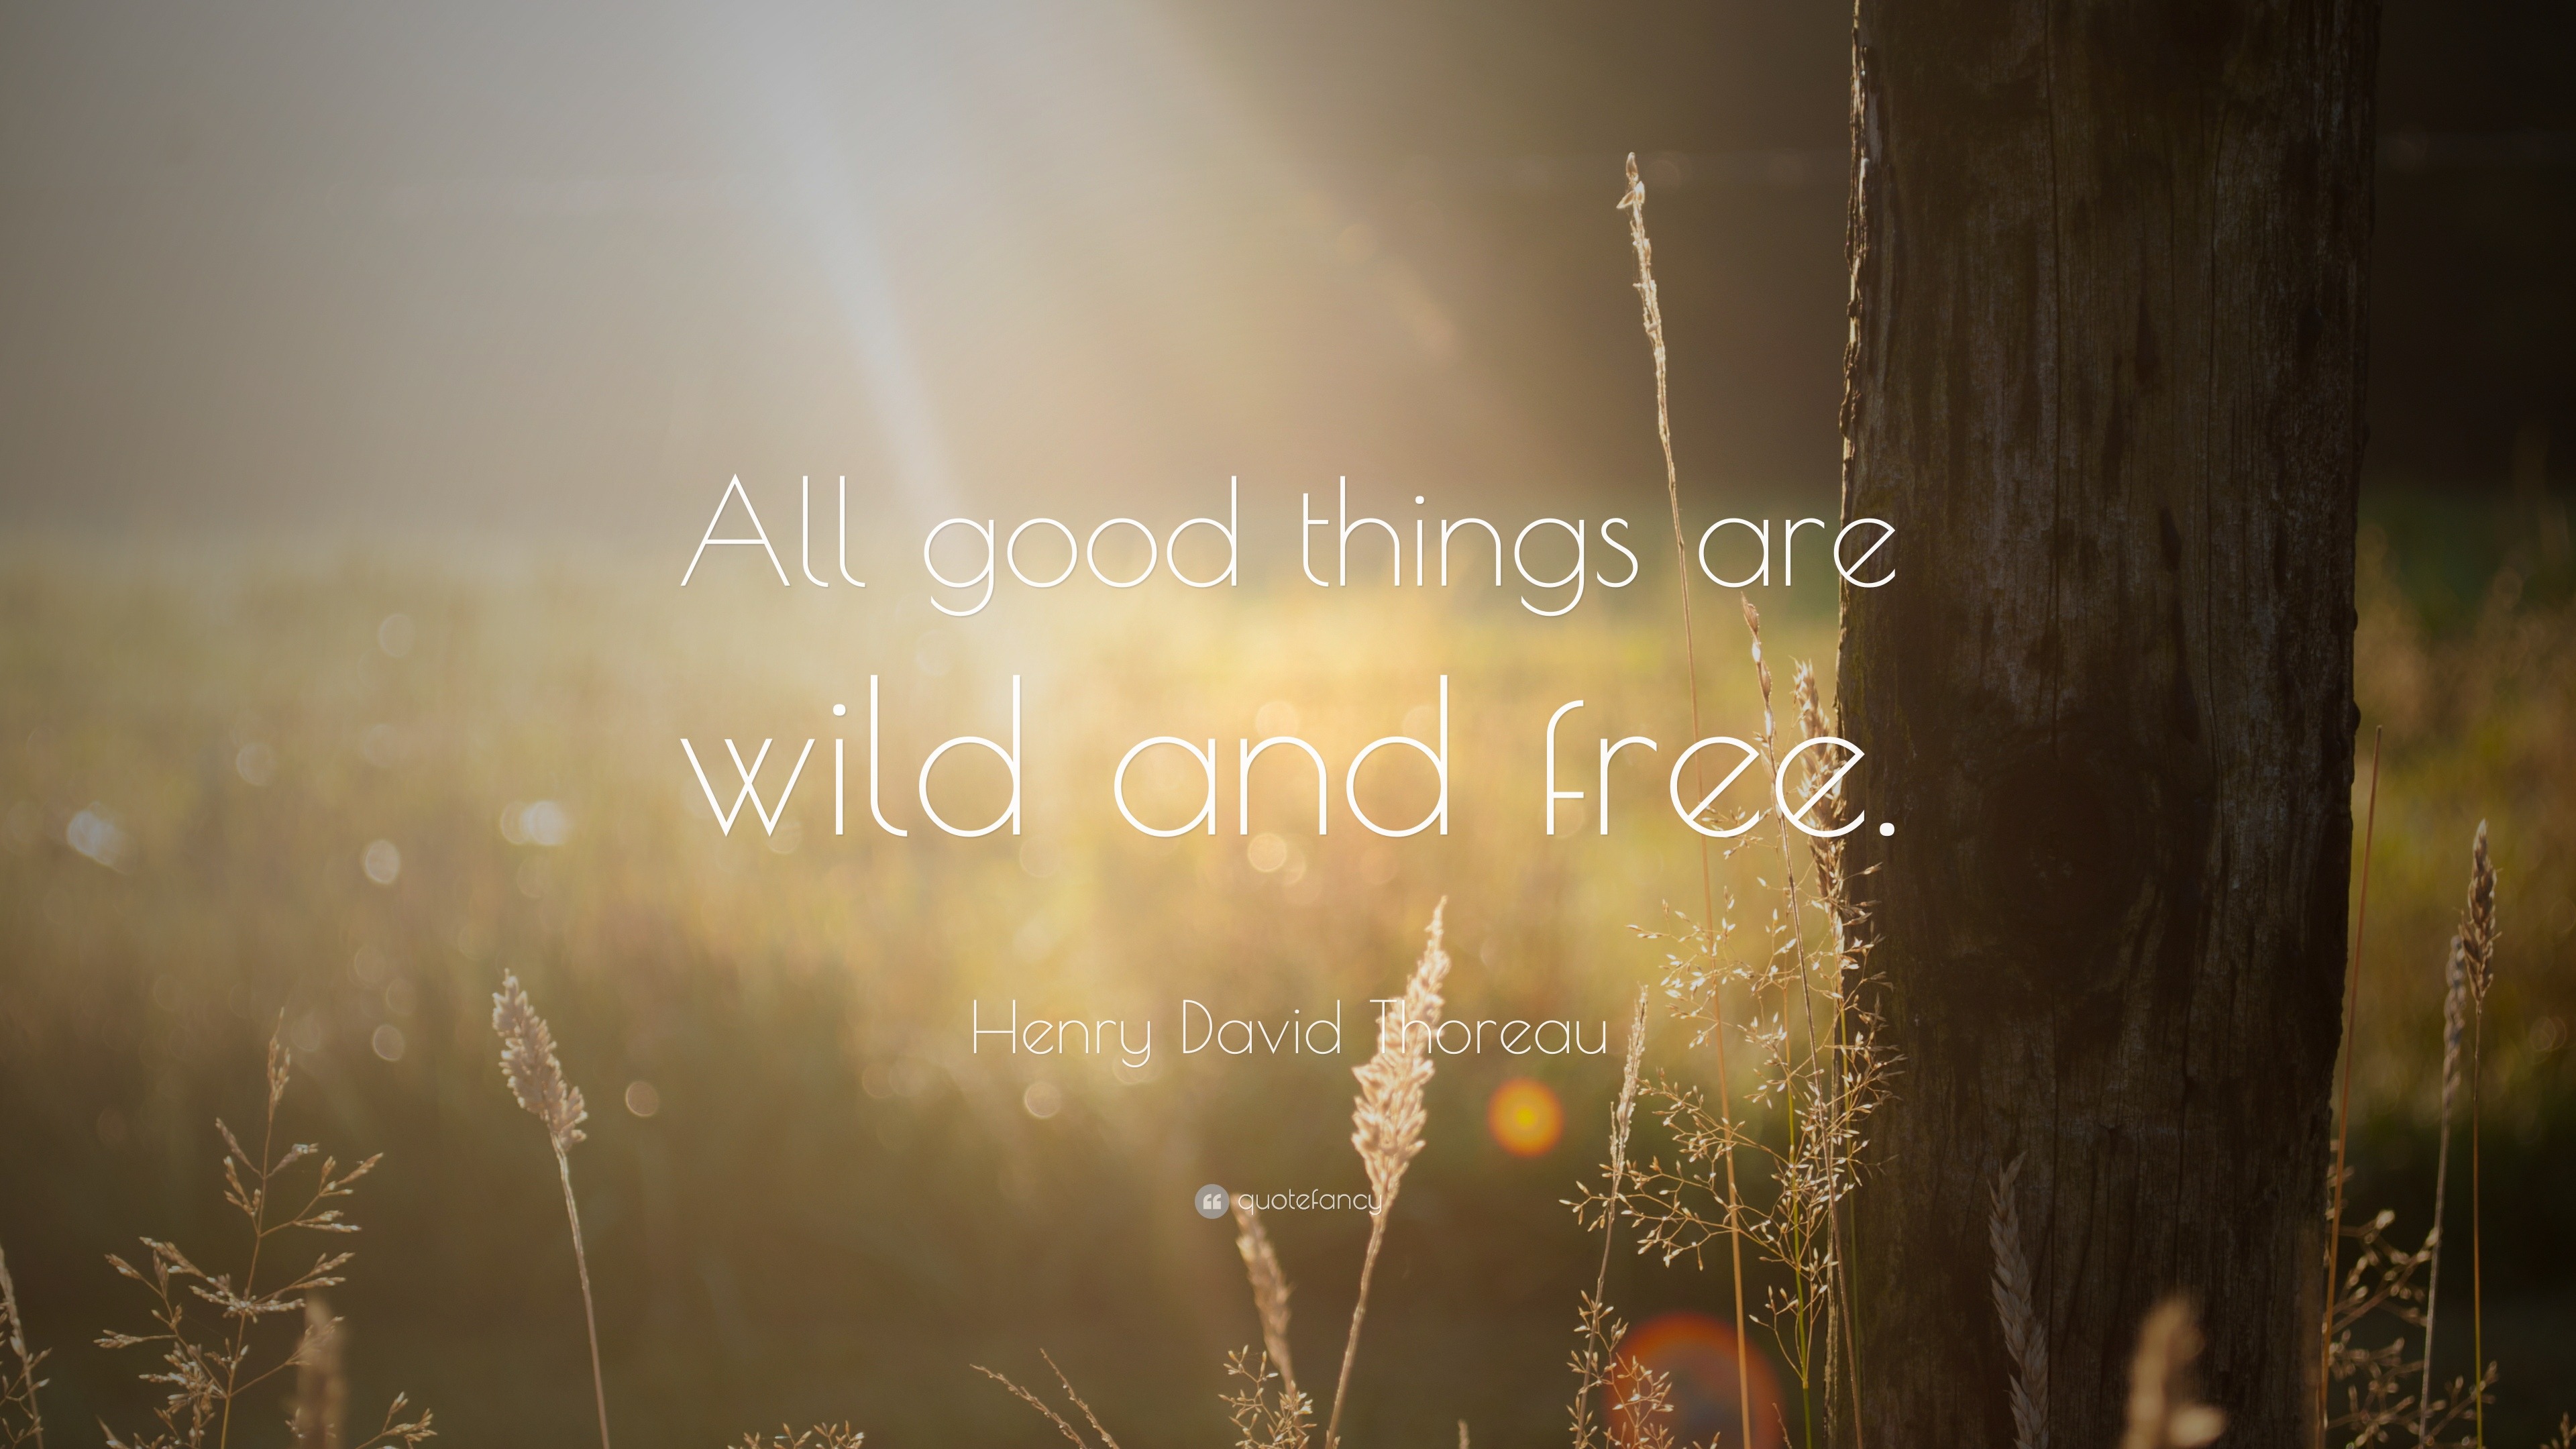 Henry David Thoreau Quote: “All good things are wild and free.” (22